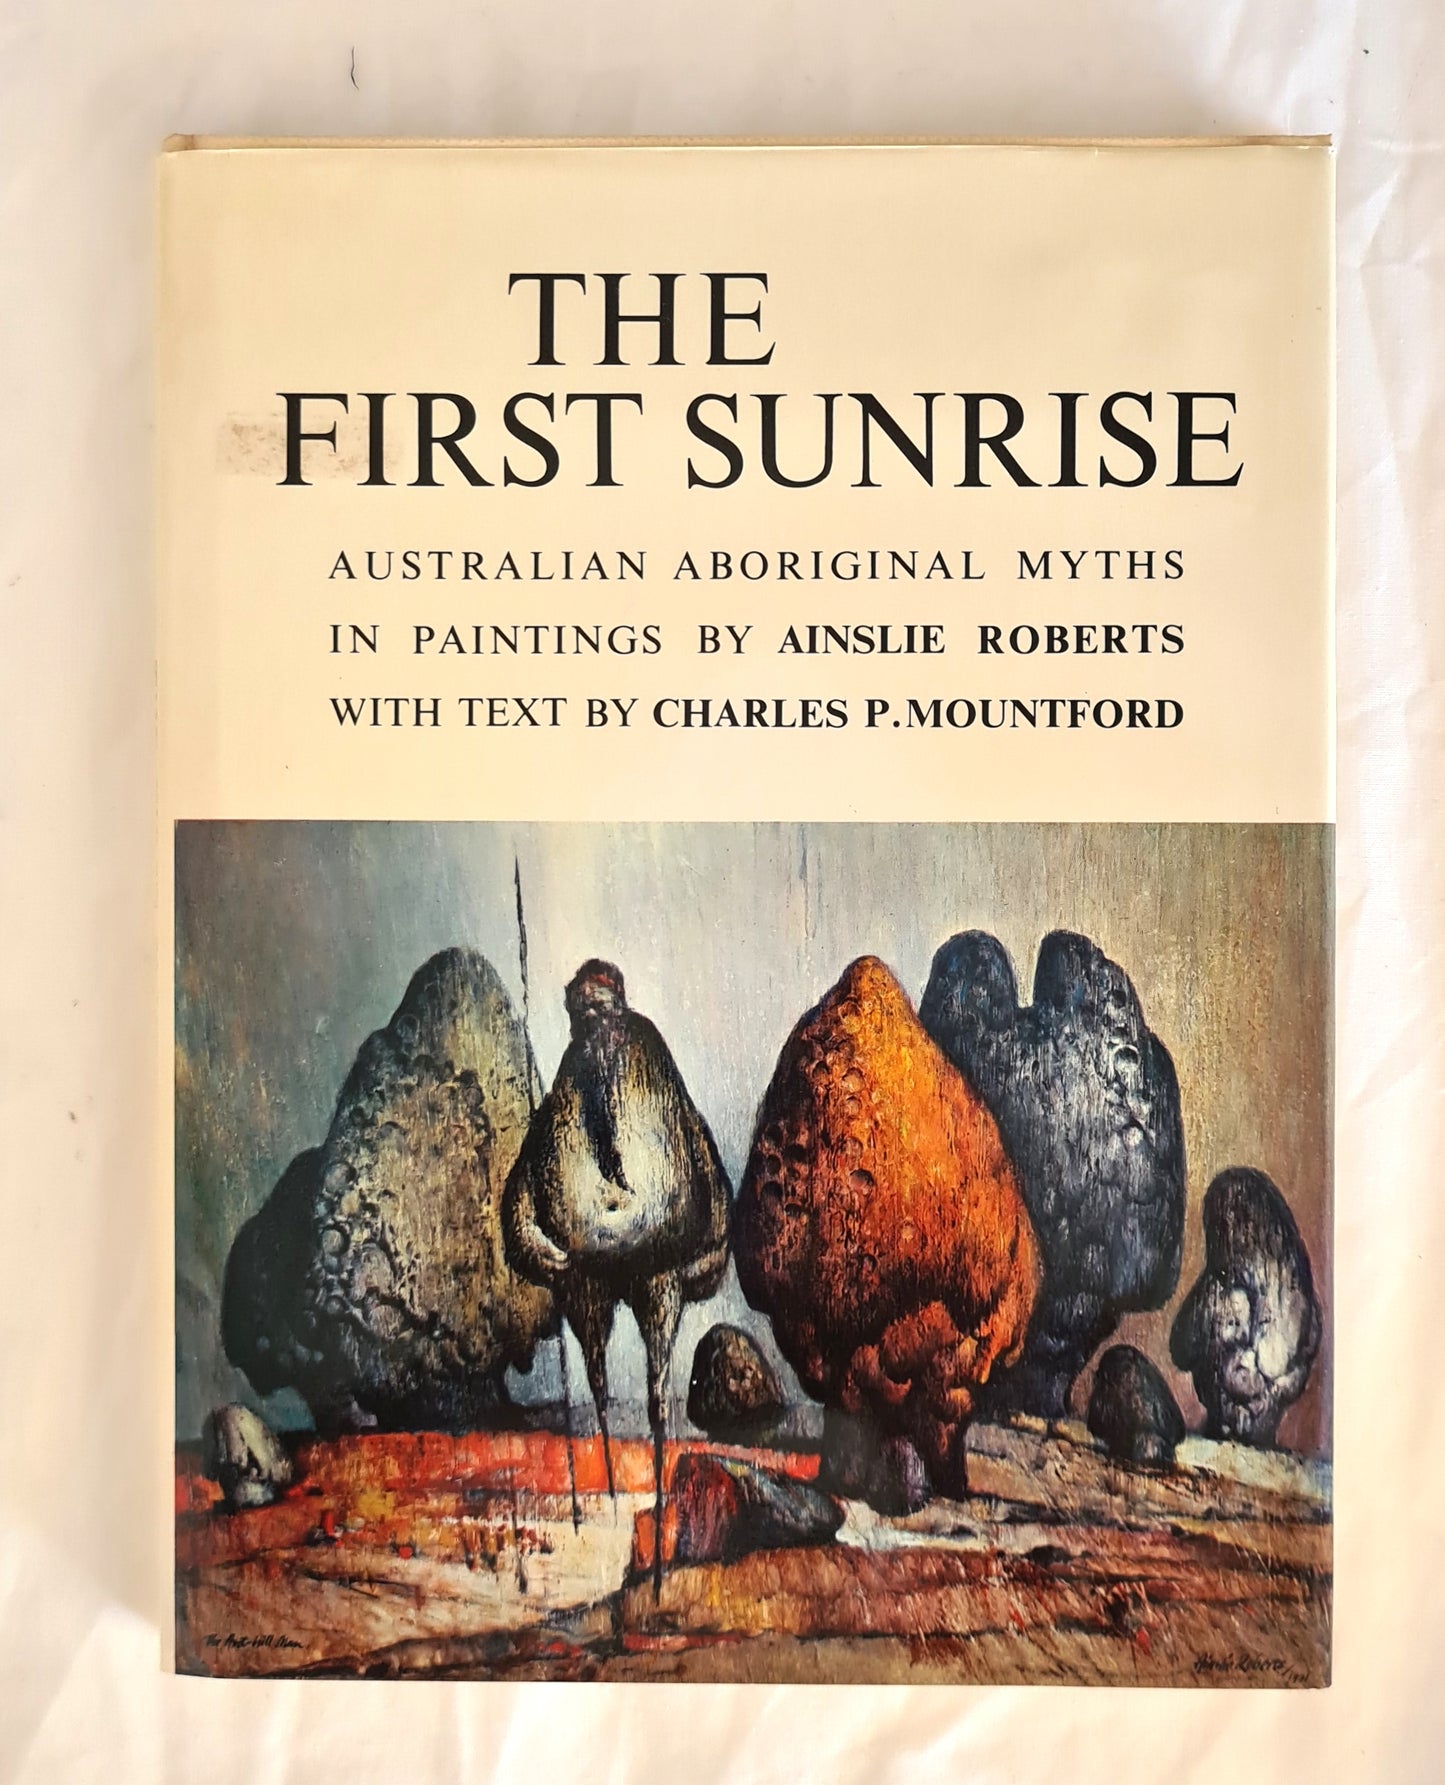 The First Sunrise  Australian Aboriginal Myths in Paintings  Paintings by Ainslie Roberts  Text by Charles P. Mountford